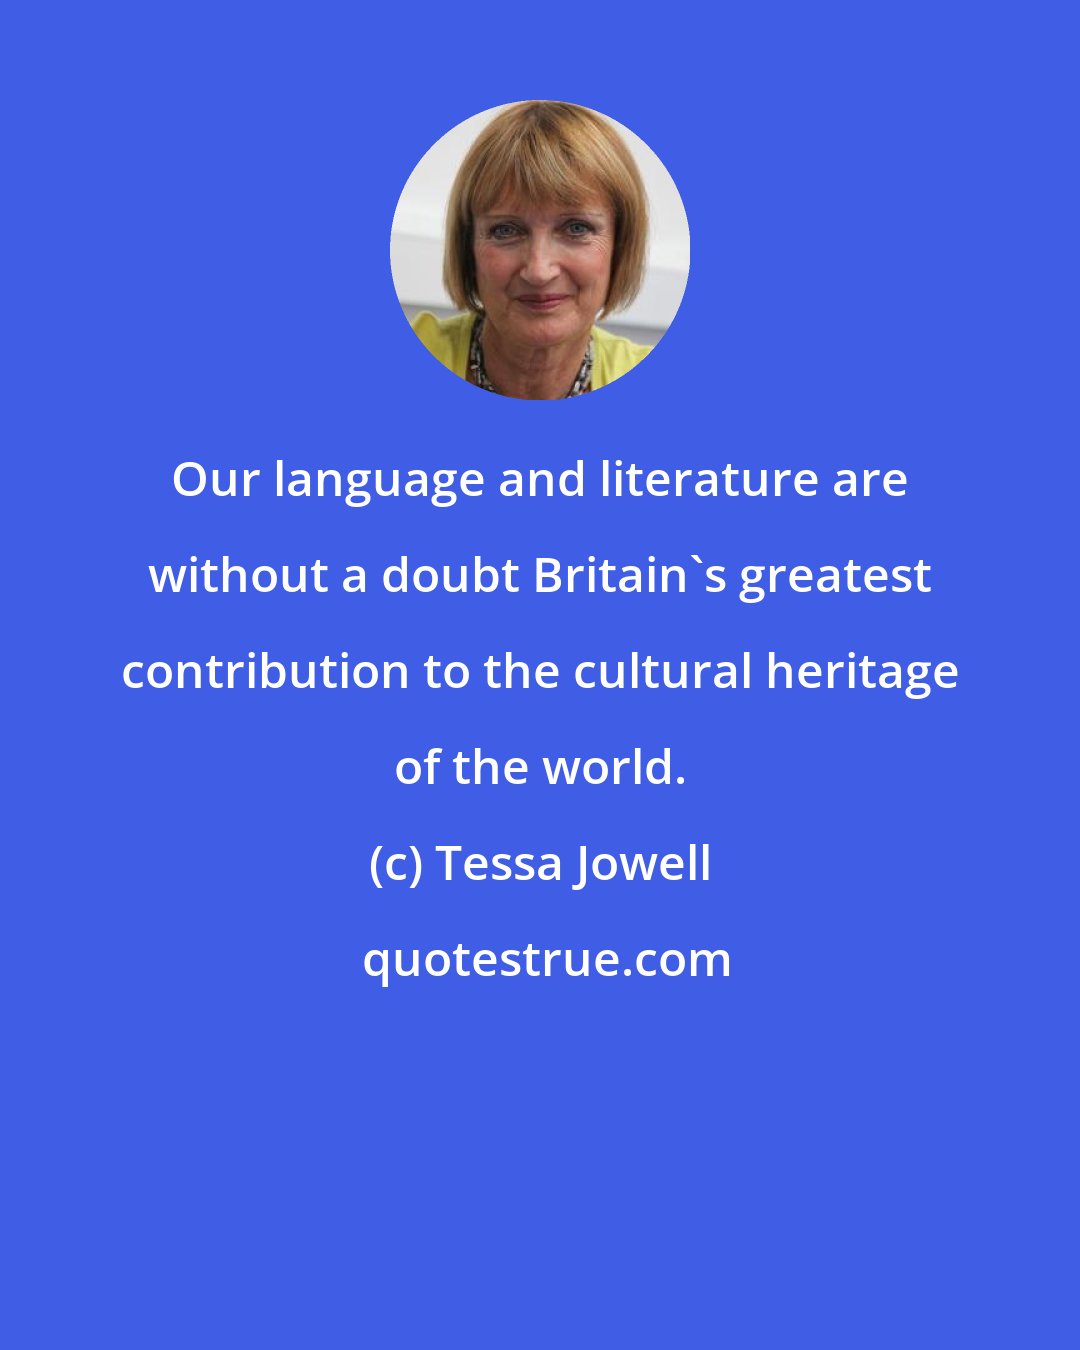 Tessa Jowell: Our language and literature are without a doubt Britain's greatest contribution to the cultural heritage of the world.